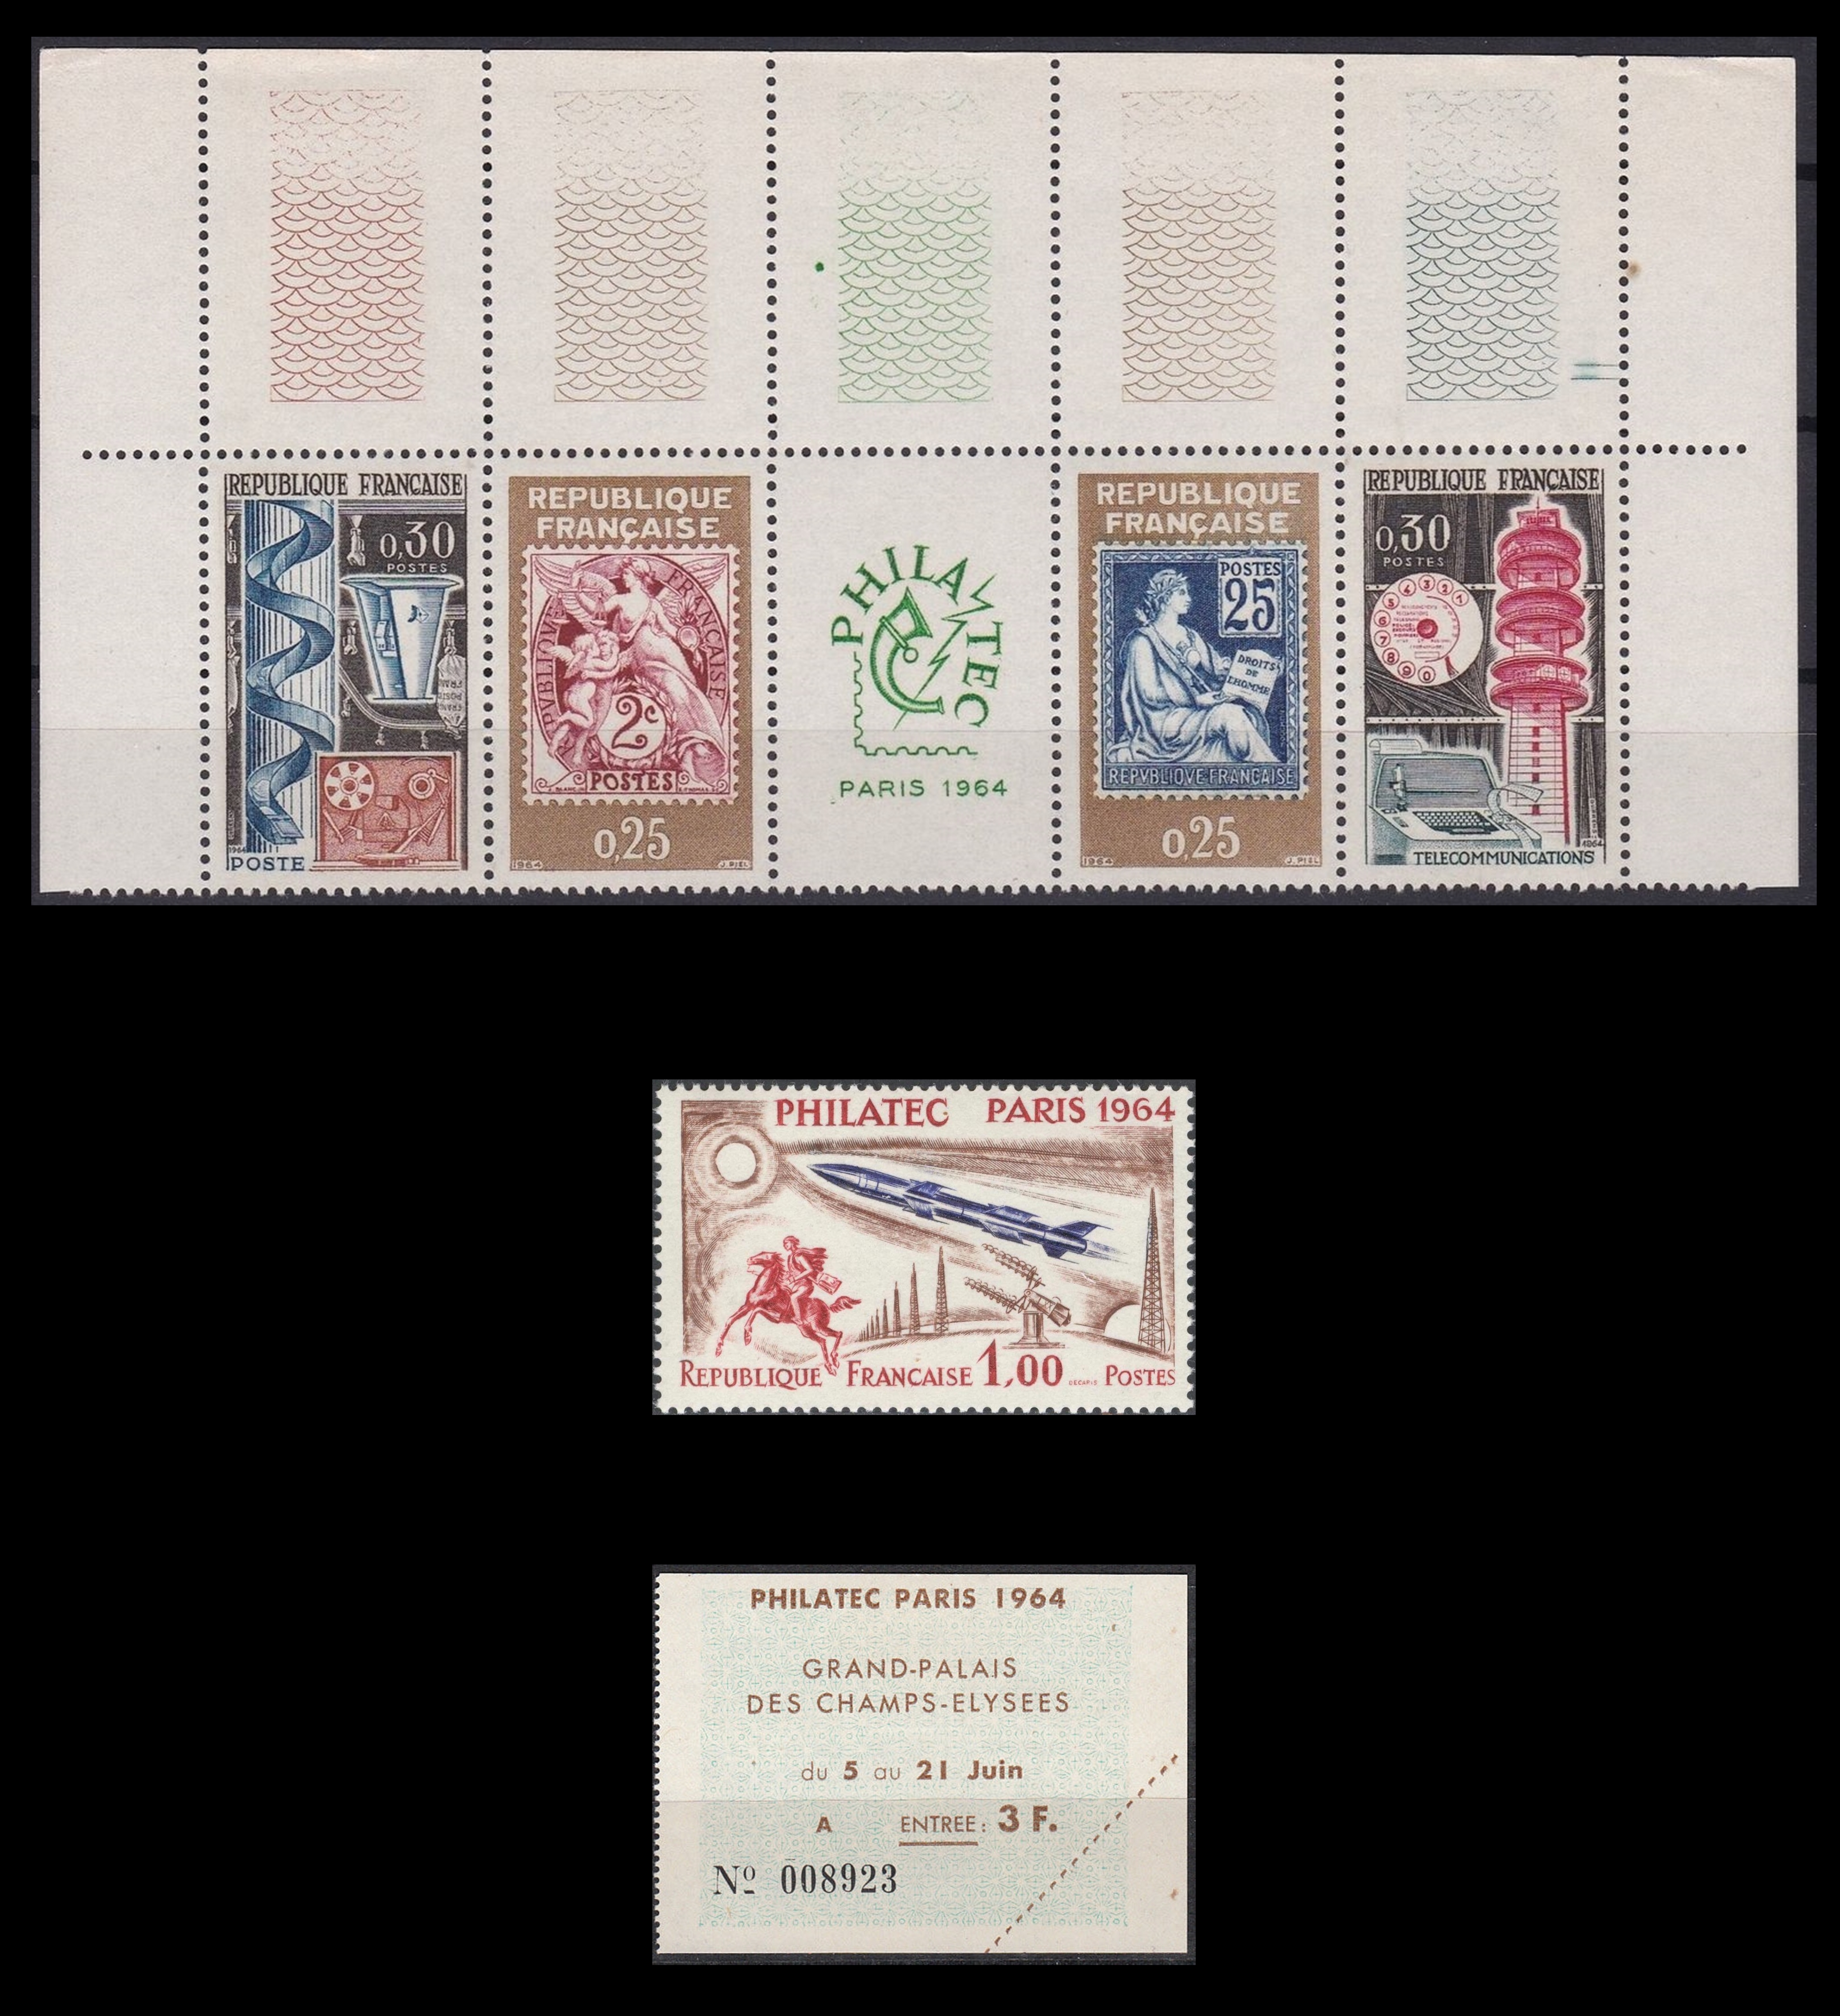 France - Scott #1085-1088 (1964) and Scott #1100 (1964), released for the PHILATEC stamp exhibition, plus a ticket to the event. Each copy of Scott #1100 purchased included a 3-franc ticket in the price.